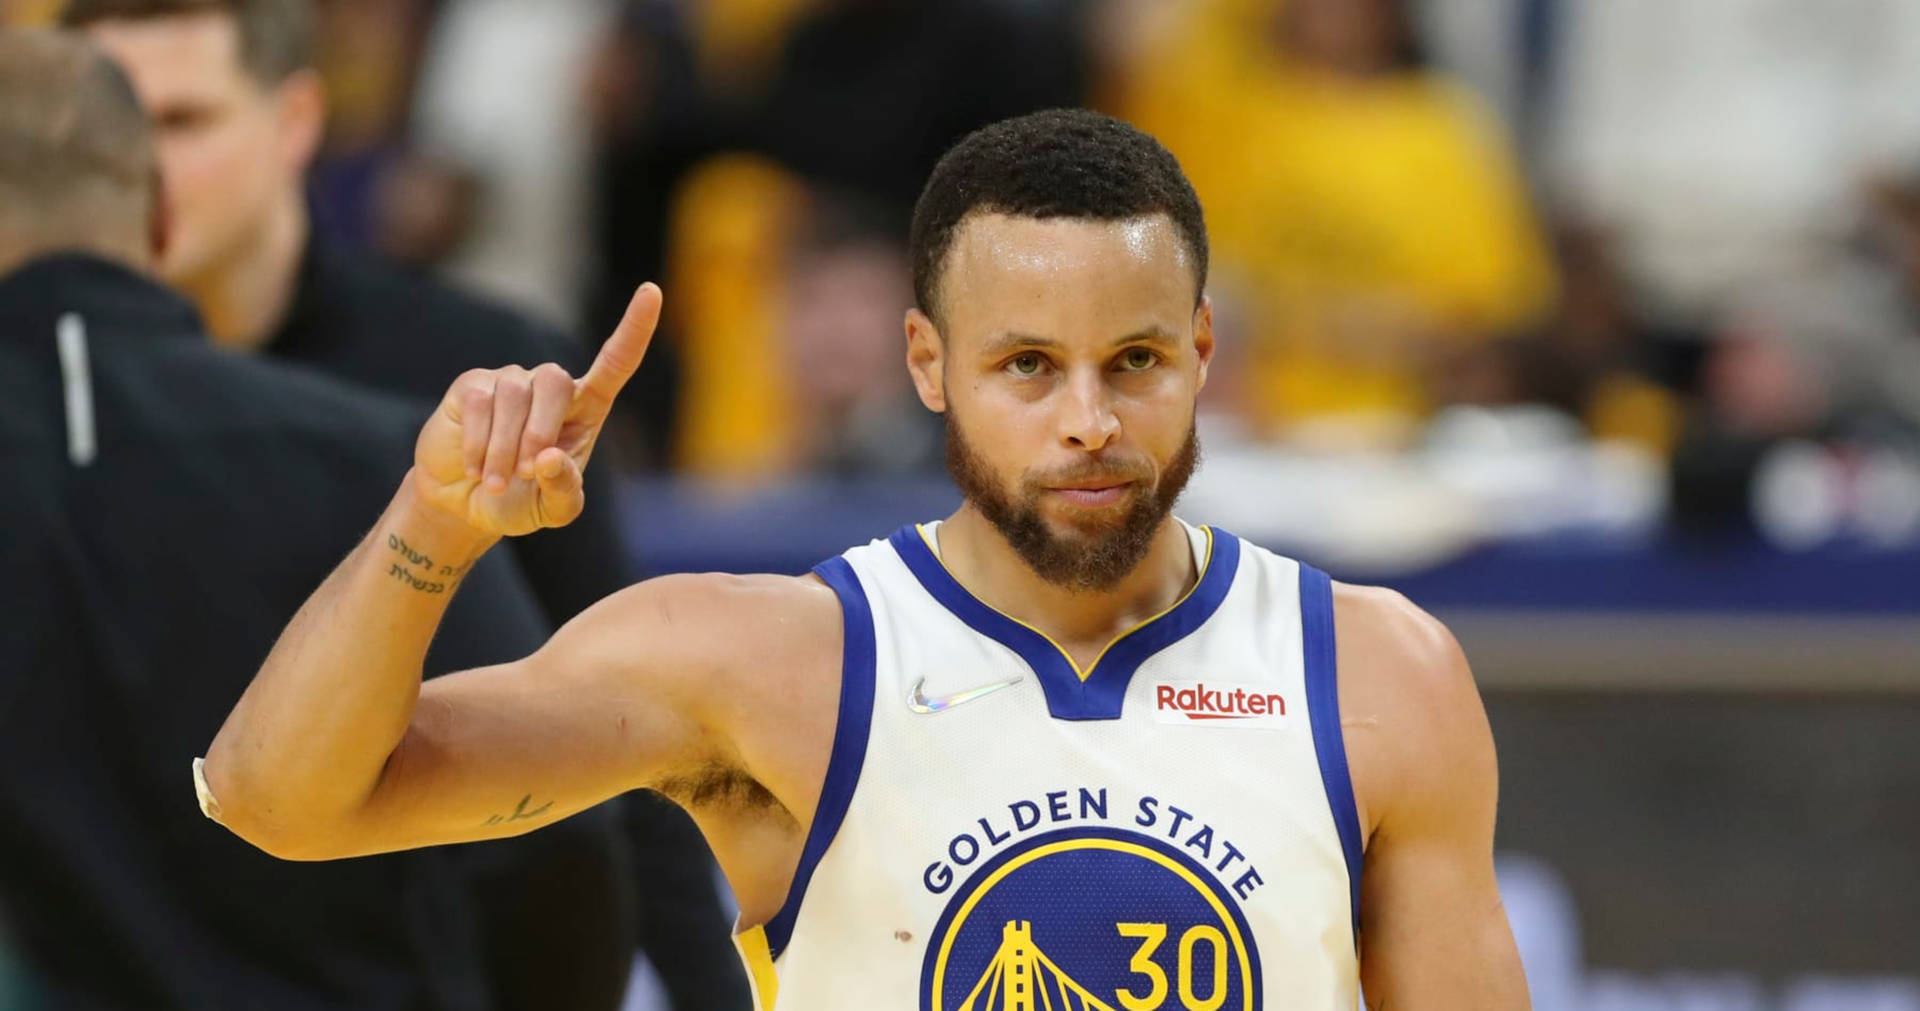 Free Steph Curry Wallpaper Downloads, Steph Curry Wallpaper for FREE